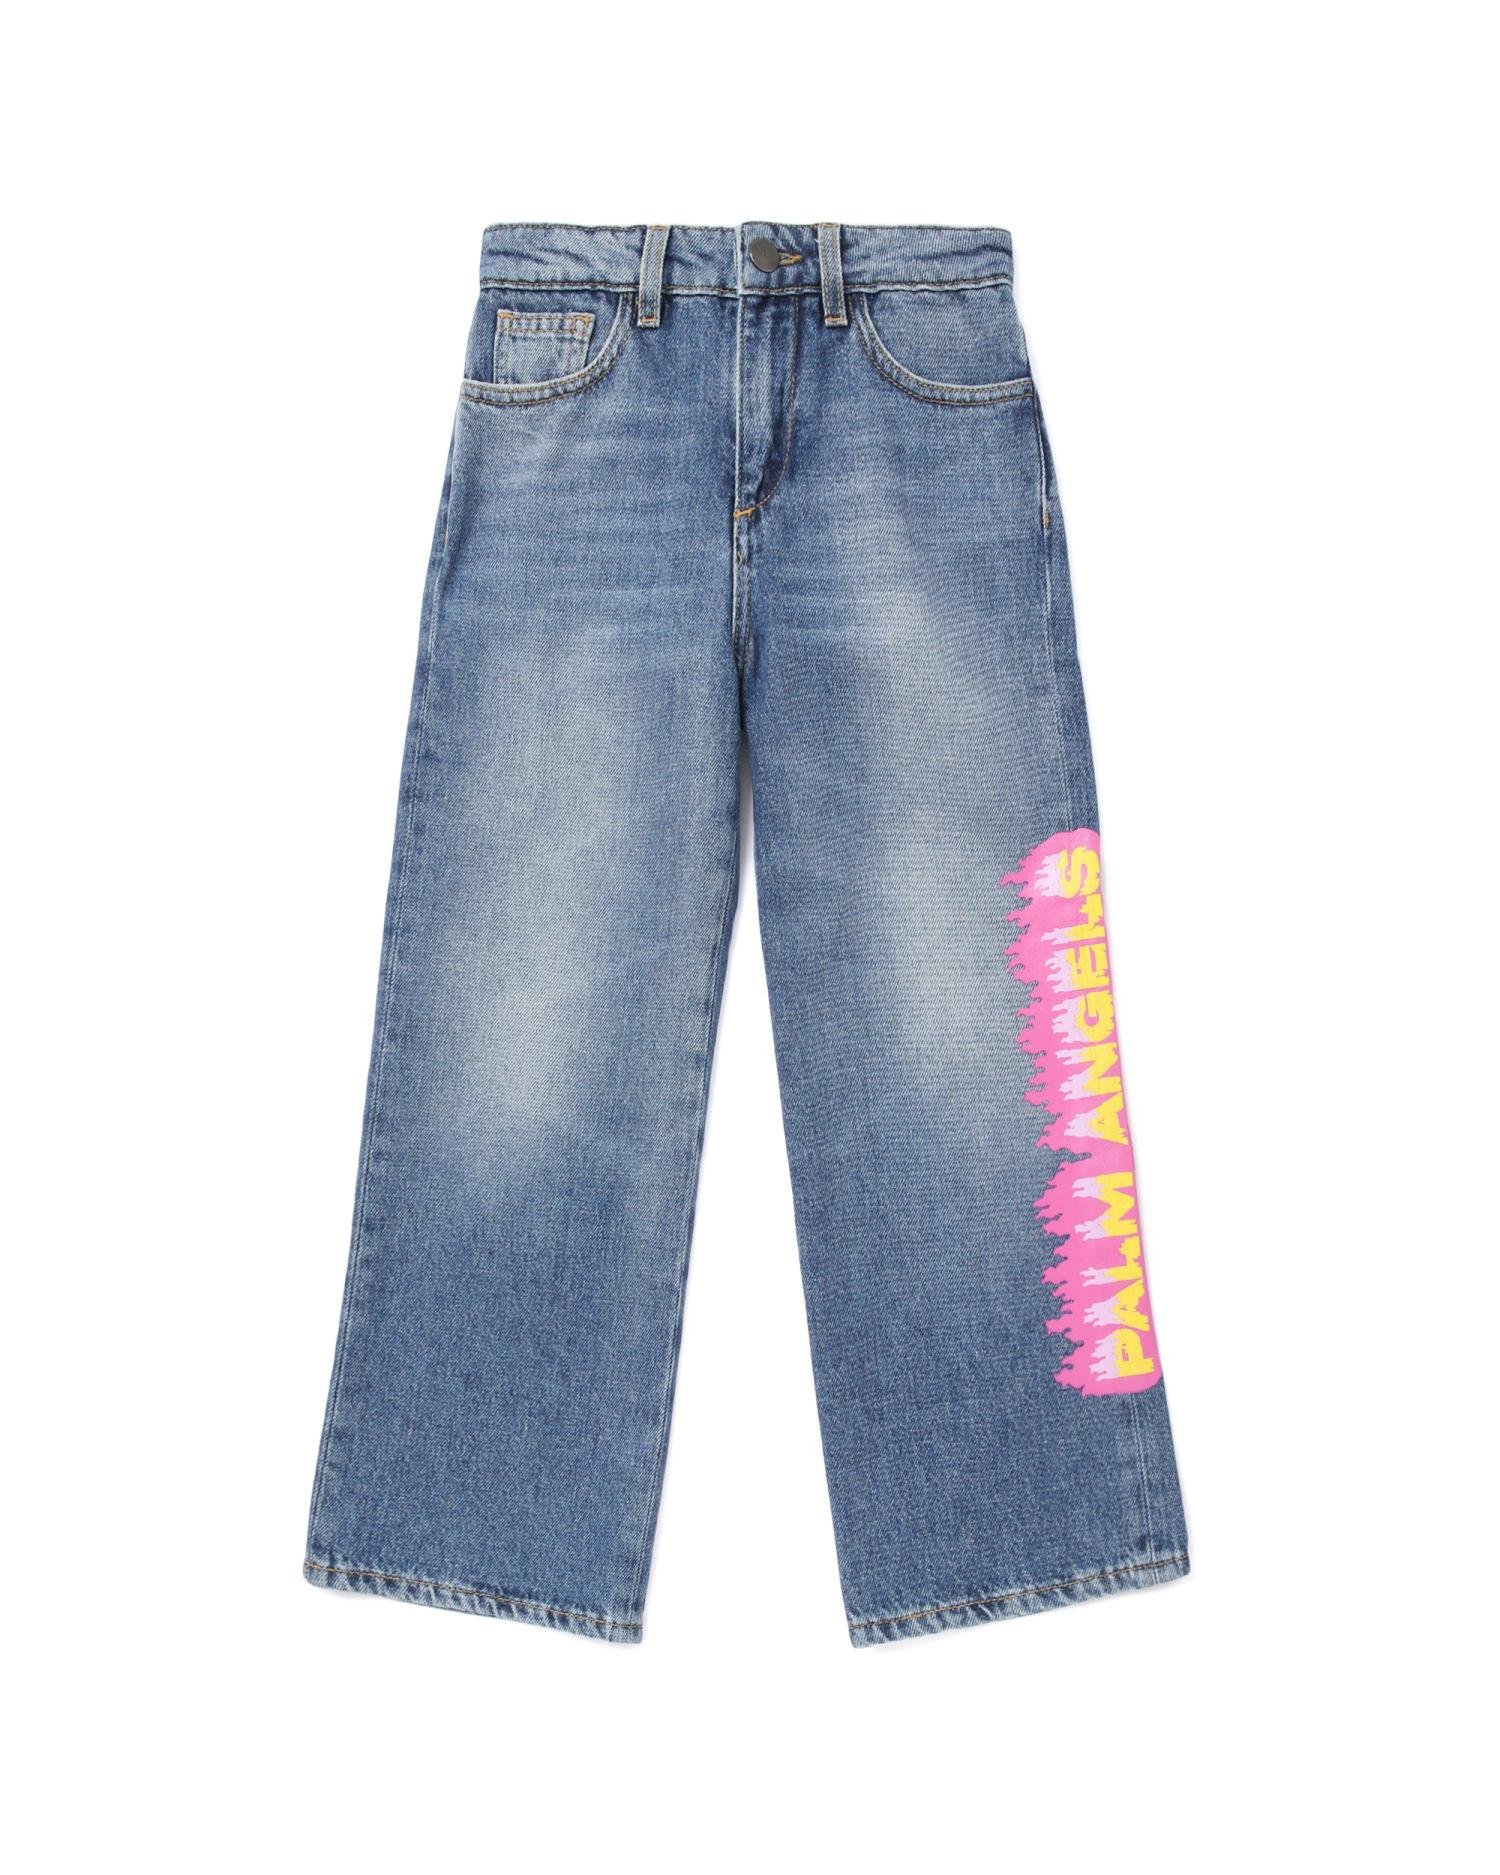 Kids logo jeans by PALM ANGELS